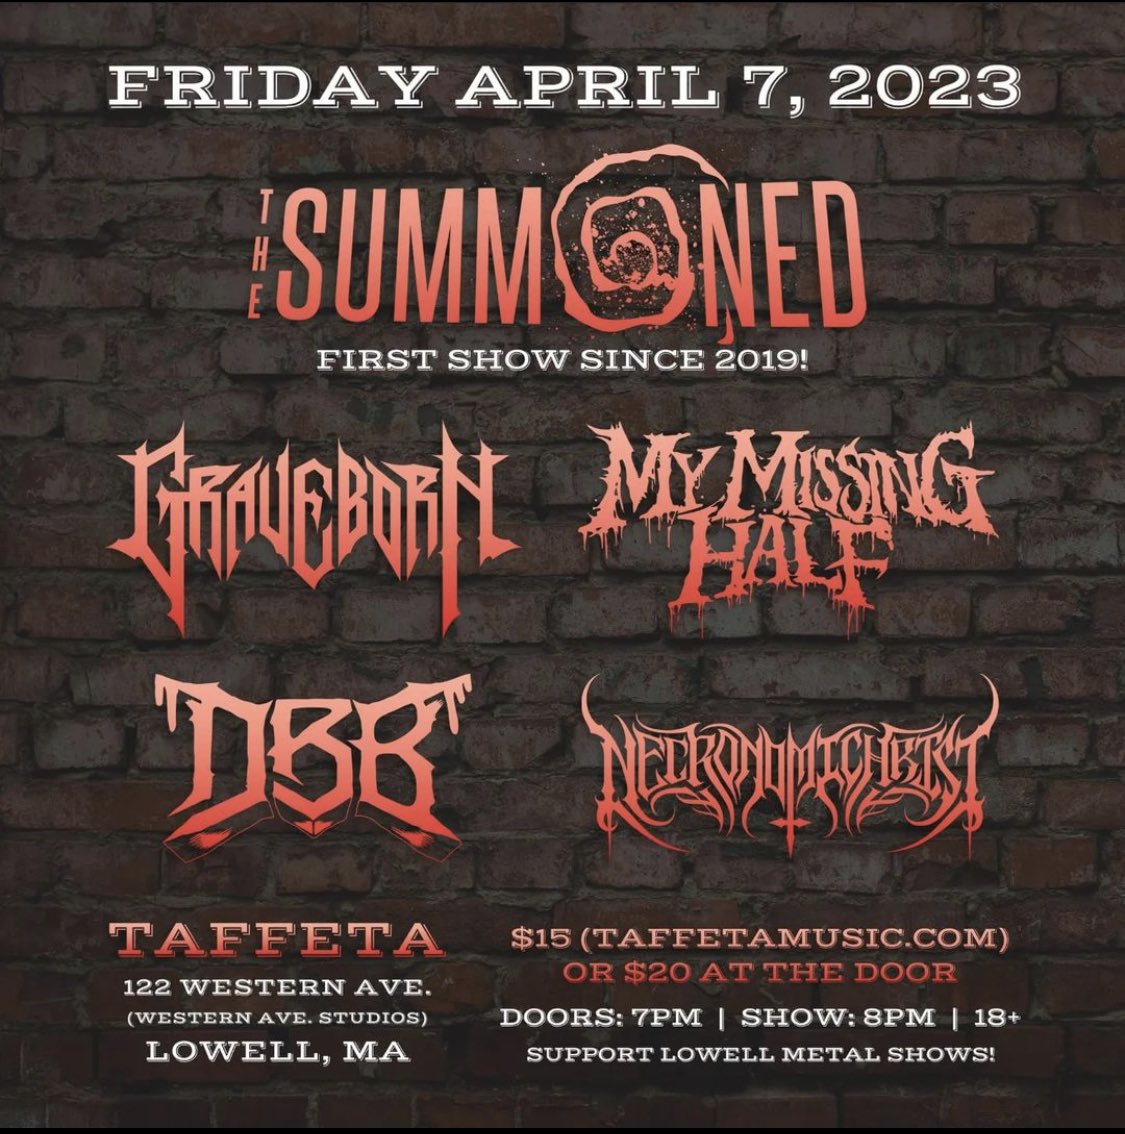 Unloading a bunch of riffs at Taffeta in Lowell MA this Friday 4/7 with the homies in @thesummoned, @dbbthrash, @Graveborn, & #Necronomichrist!
Doors at 7, tix in bio. Come party! 🎉🔥

📸: Michael Alvarez